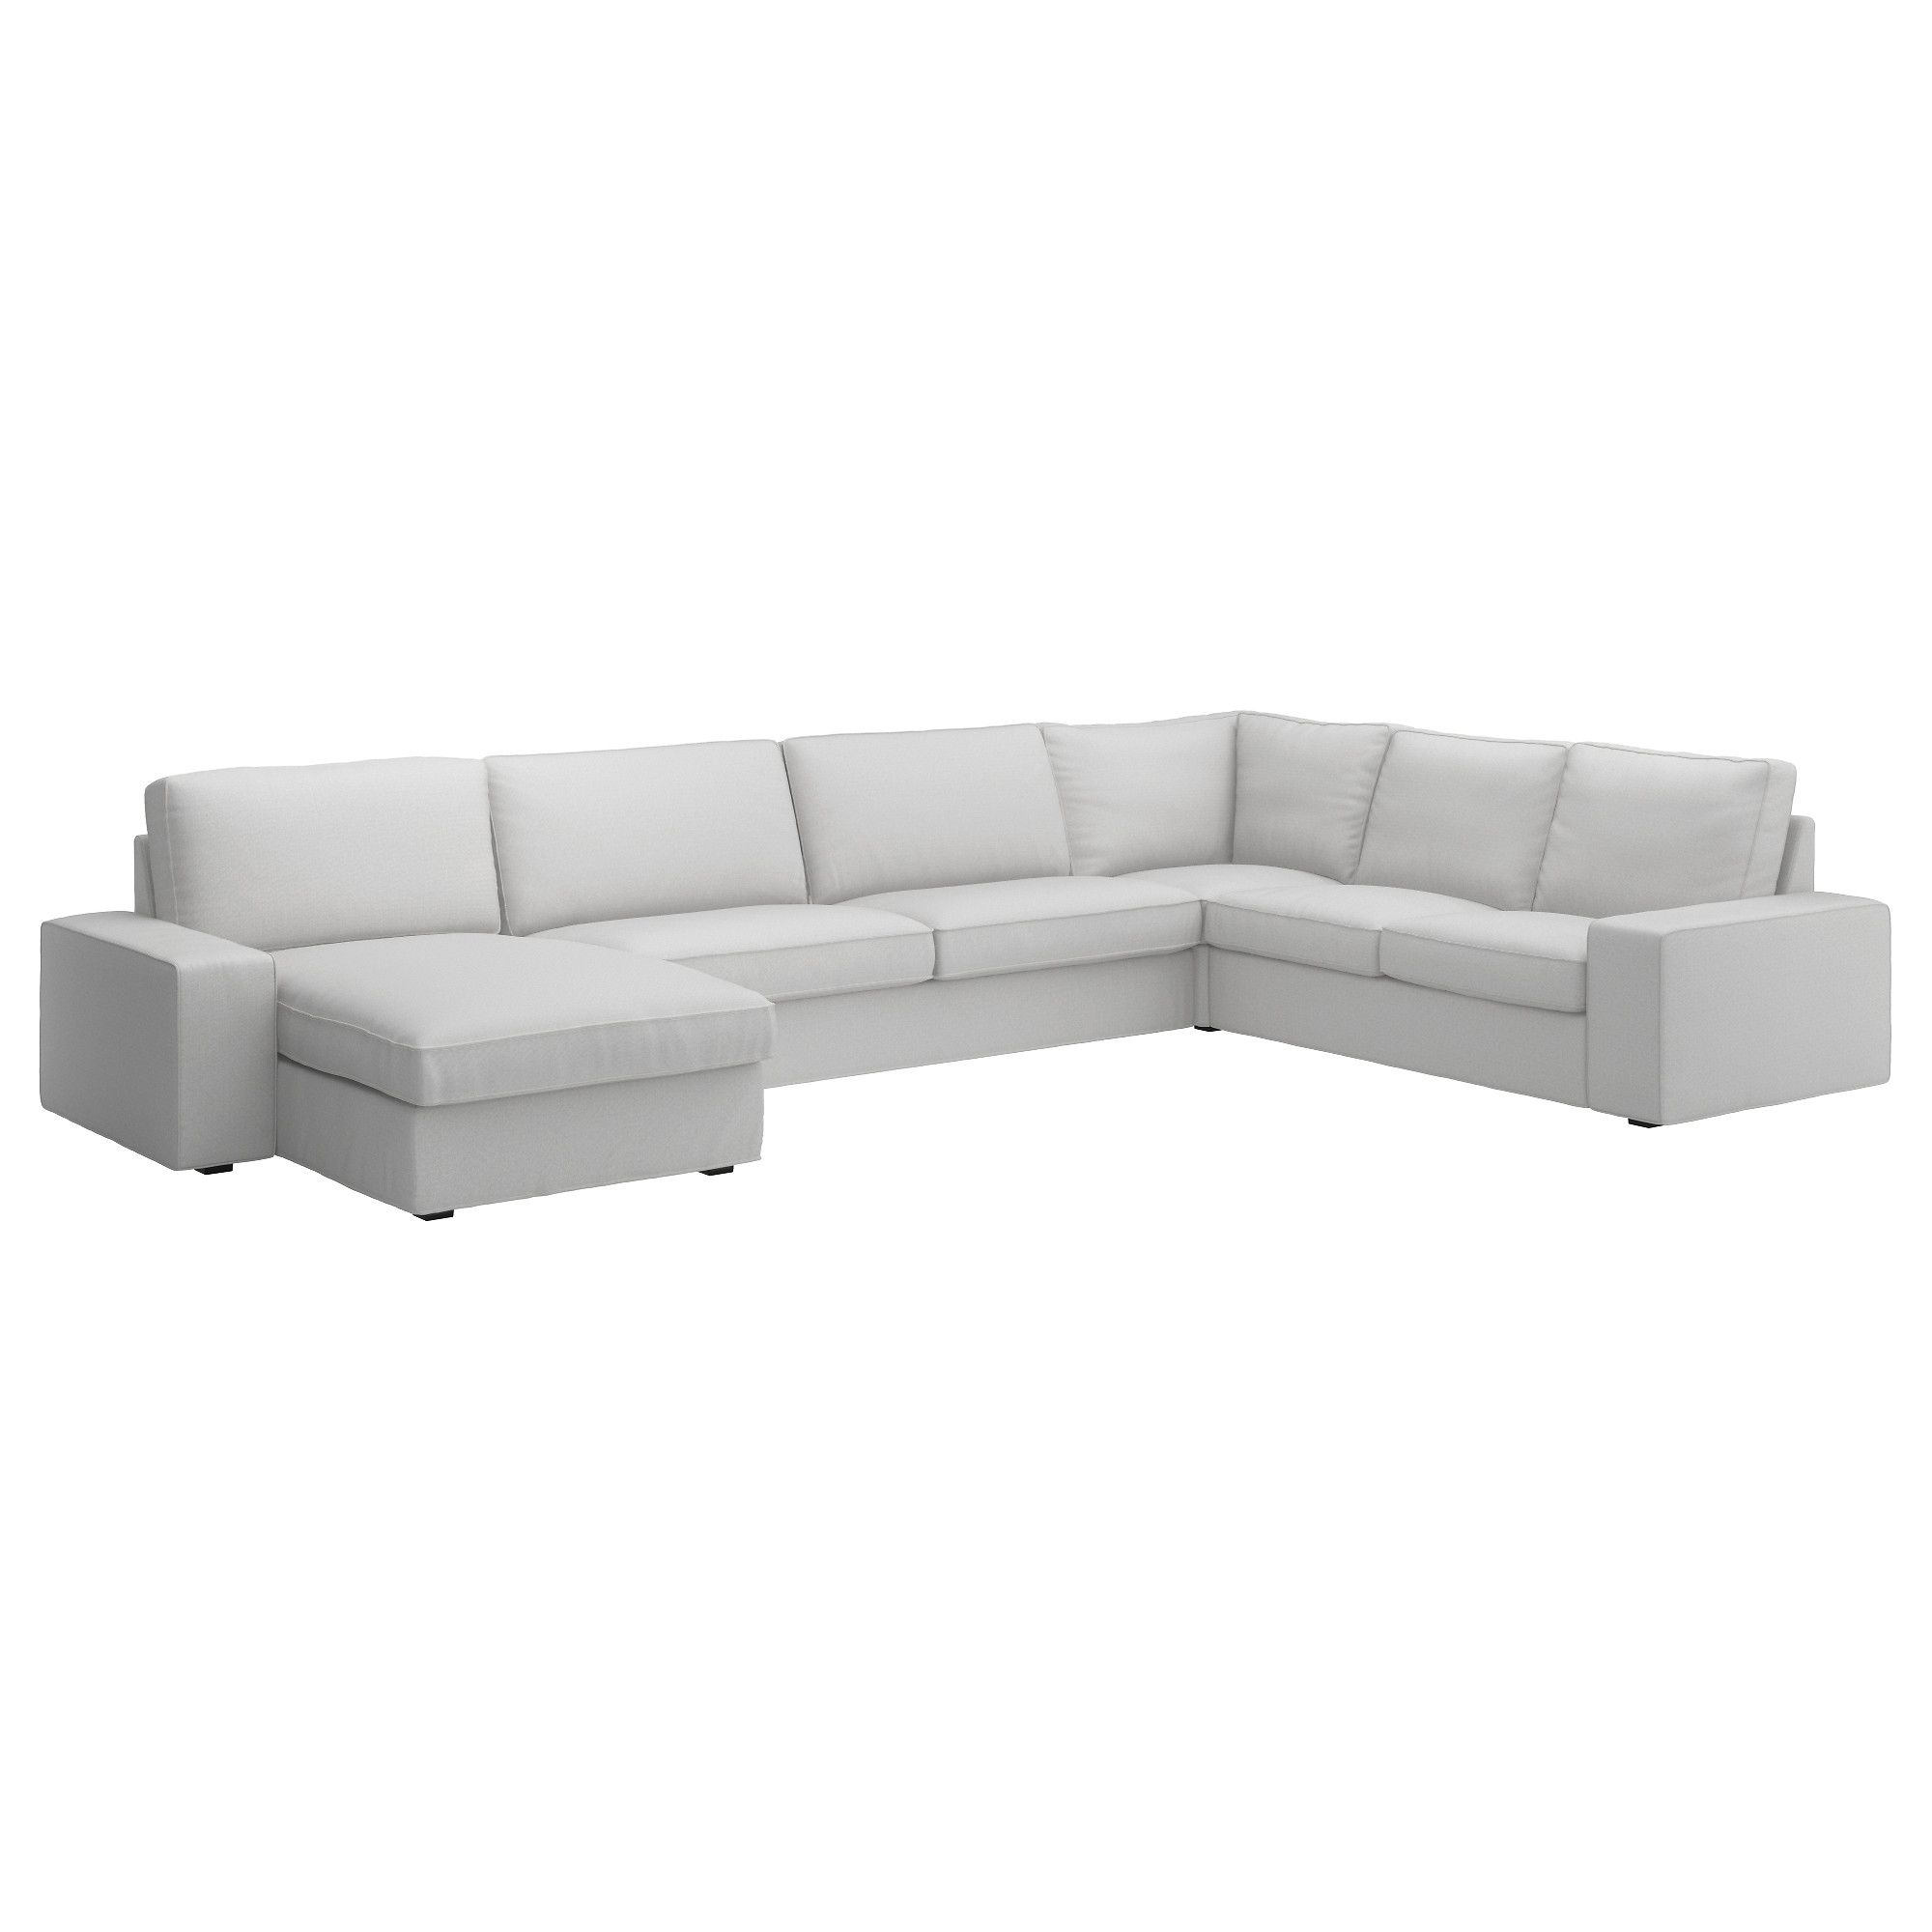 Favorite Ikea Chaise Sofas In Kivik Sectional, 5 Seat – With Chaise/orrsta Light Gray – Ikea (View 12 of 15)